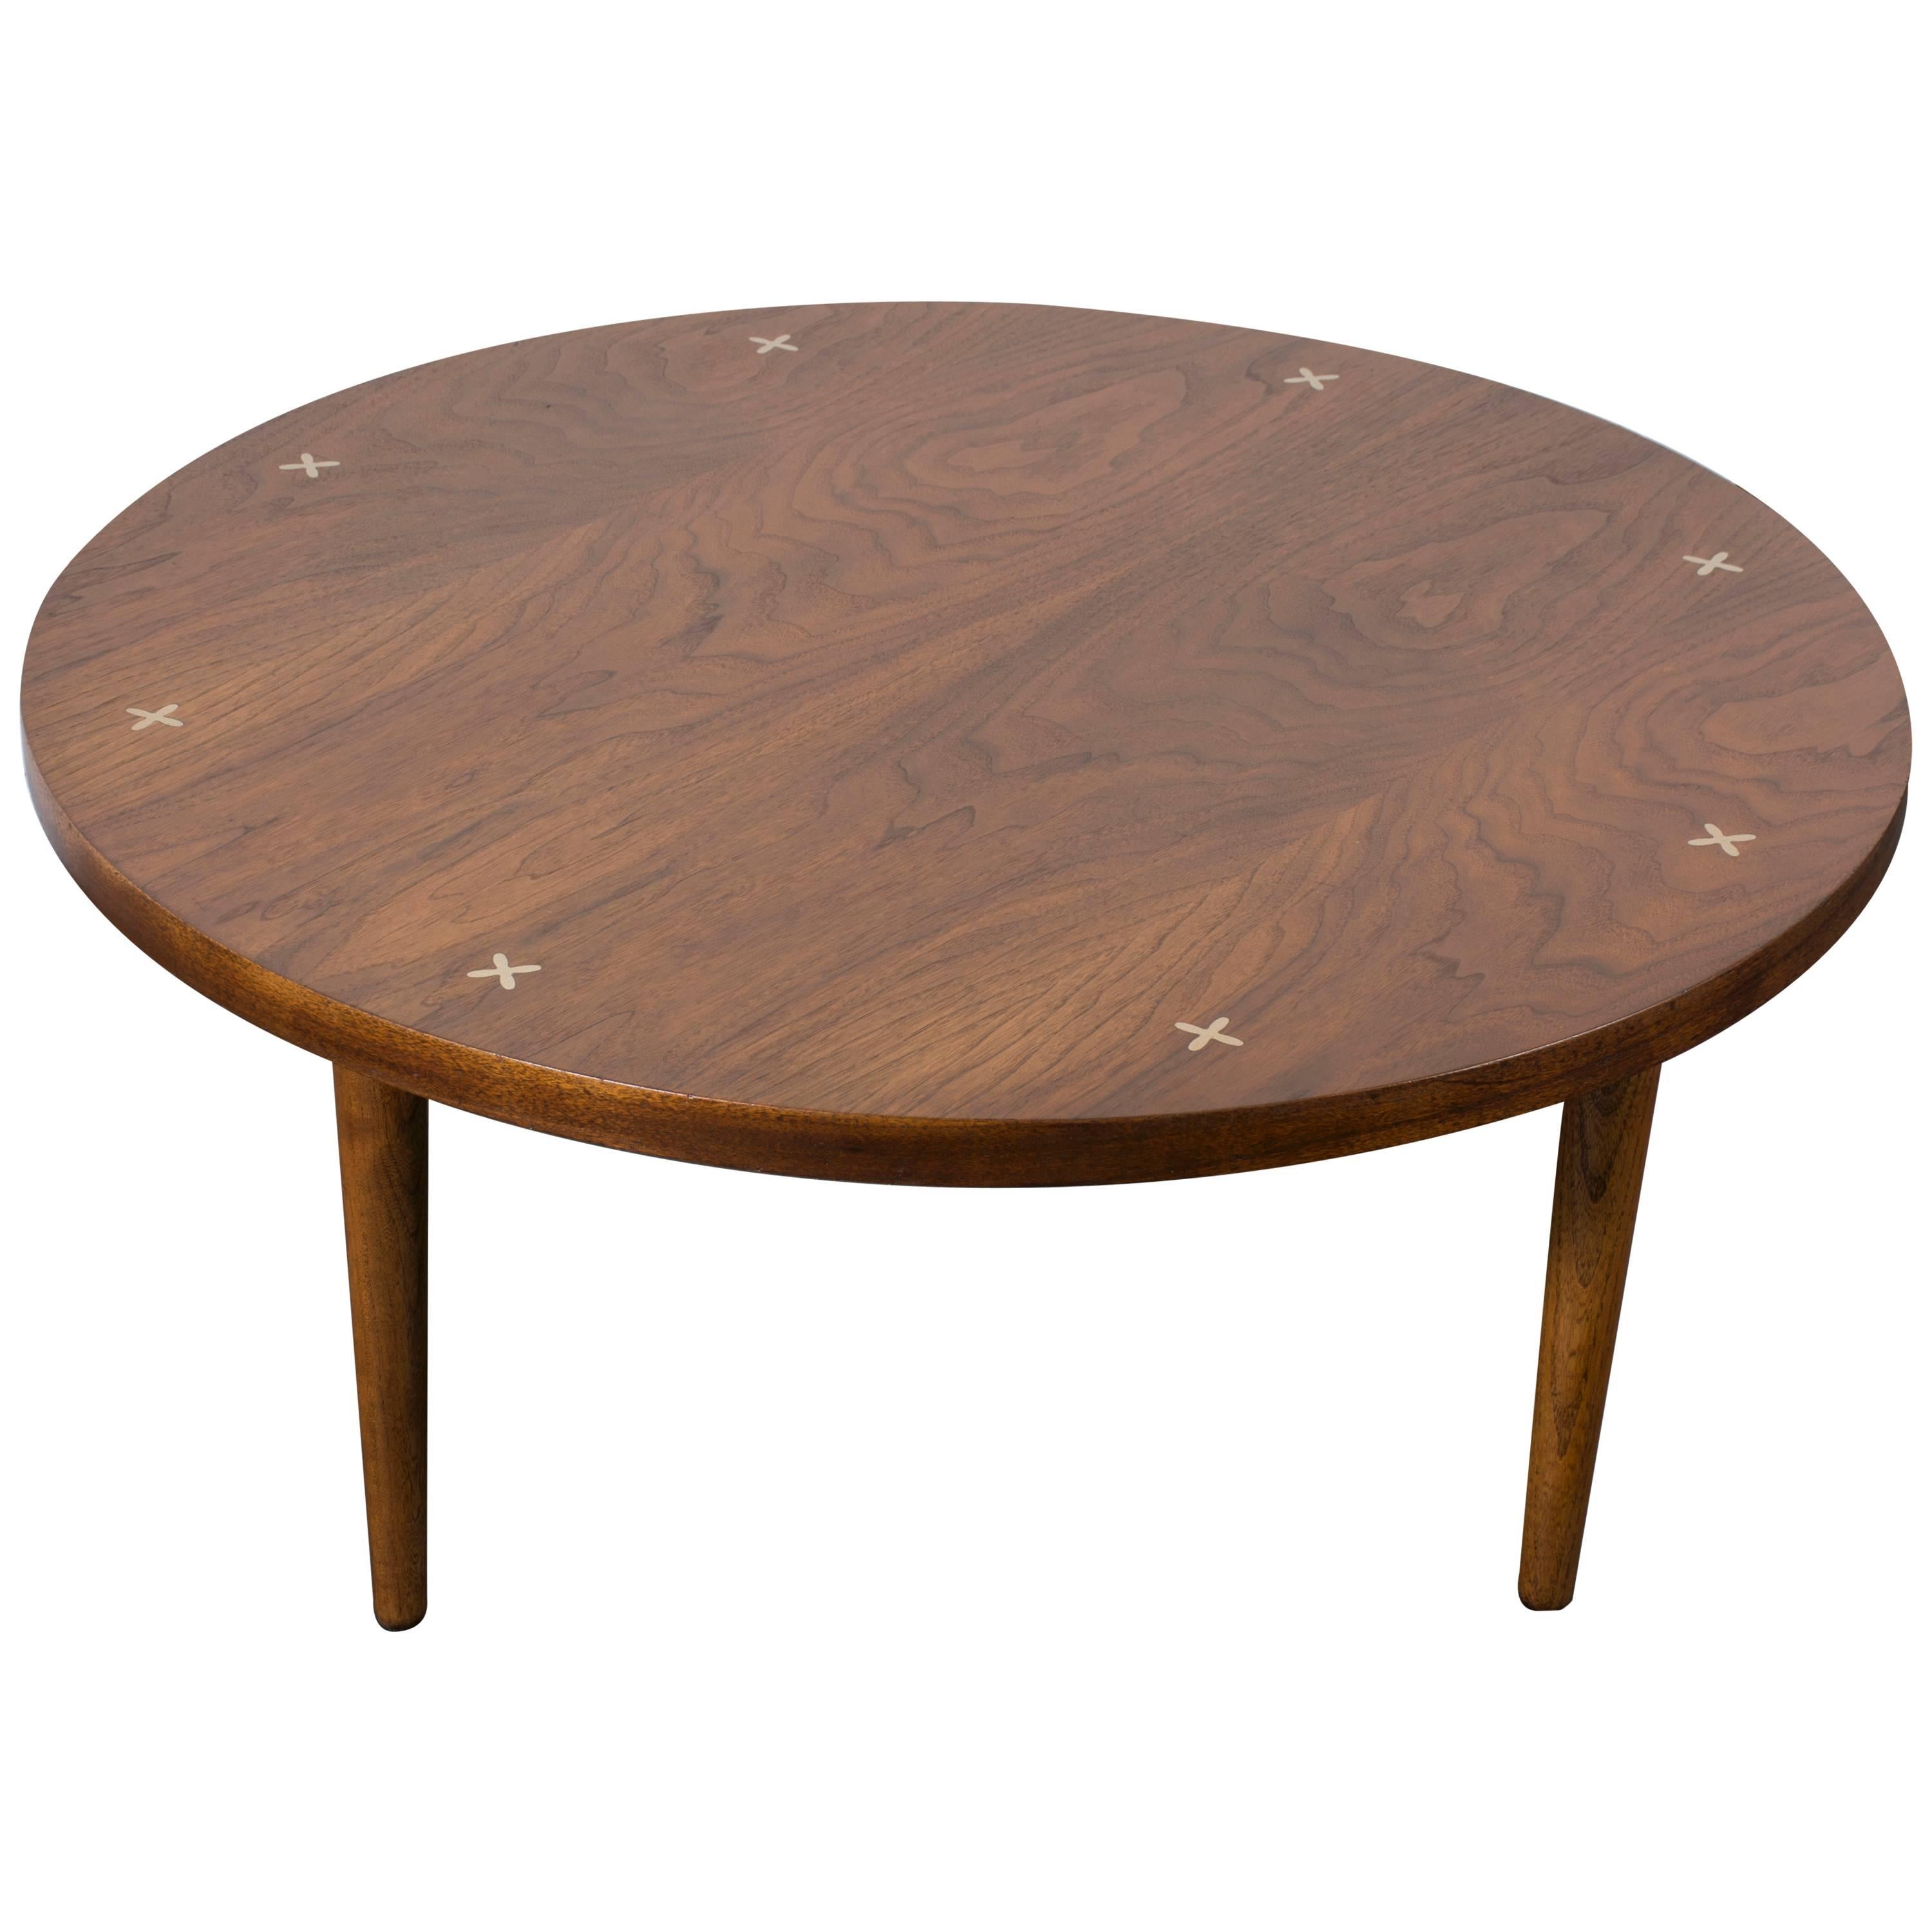 Mid-Century Modern Coffee Table by American of Martinsville